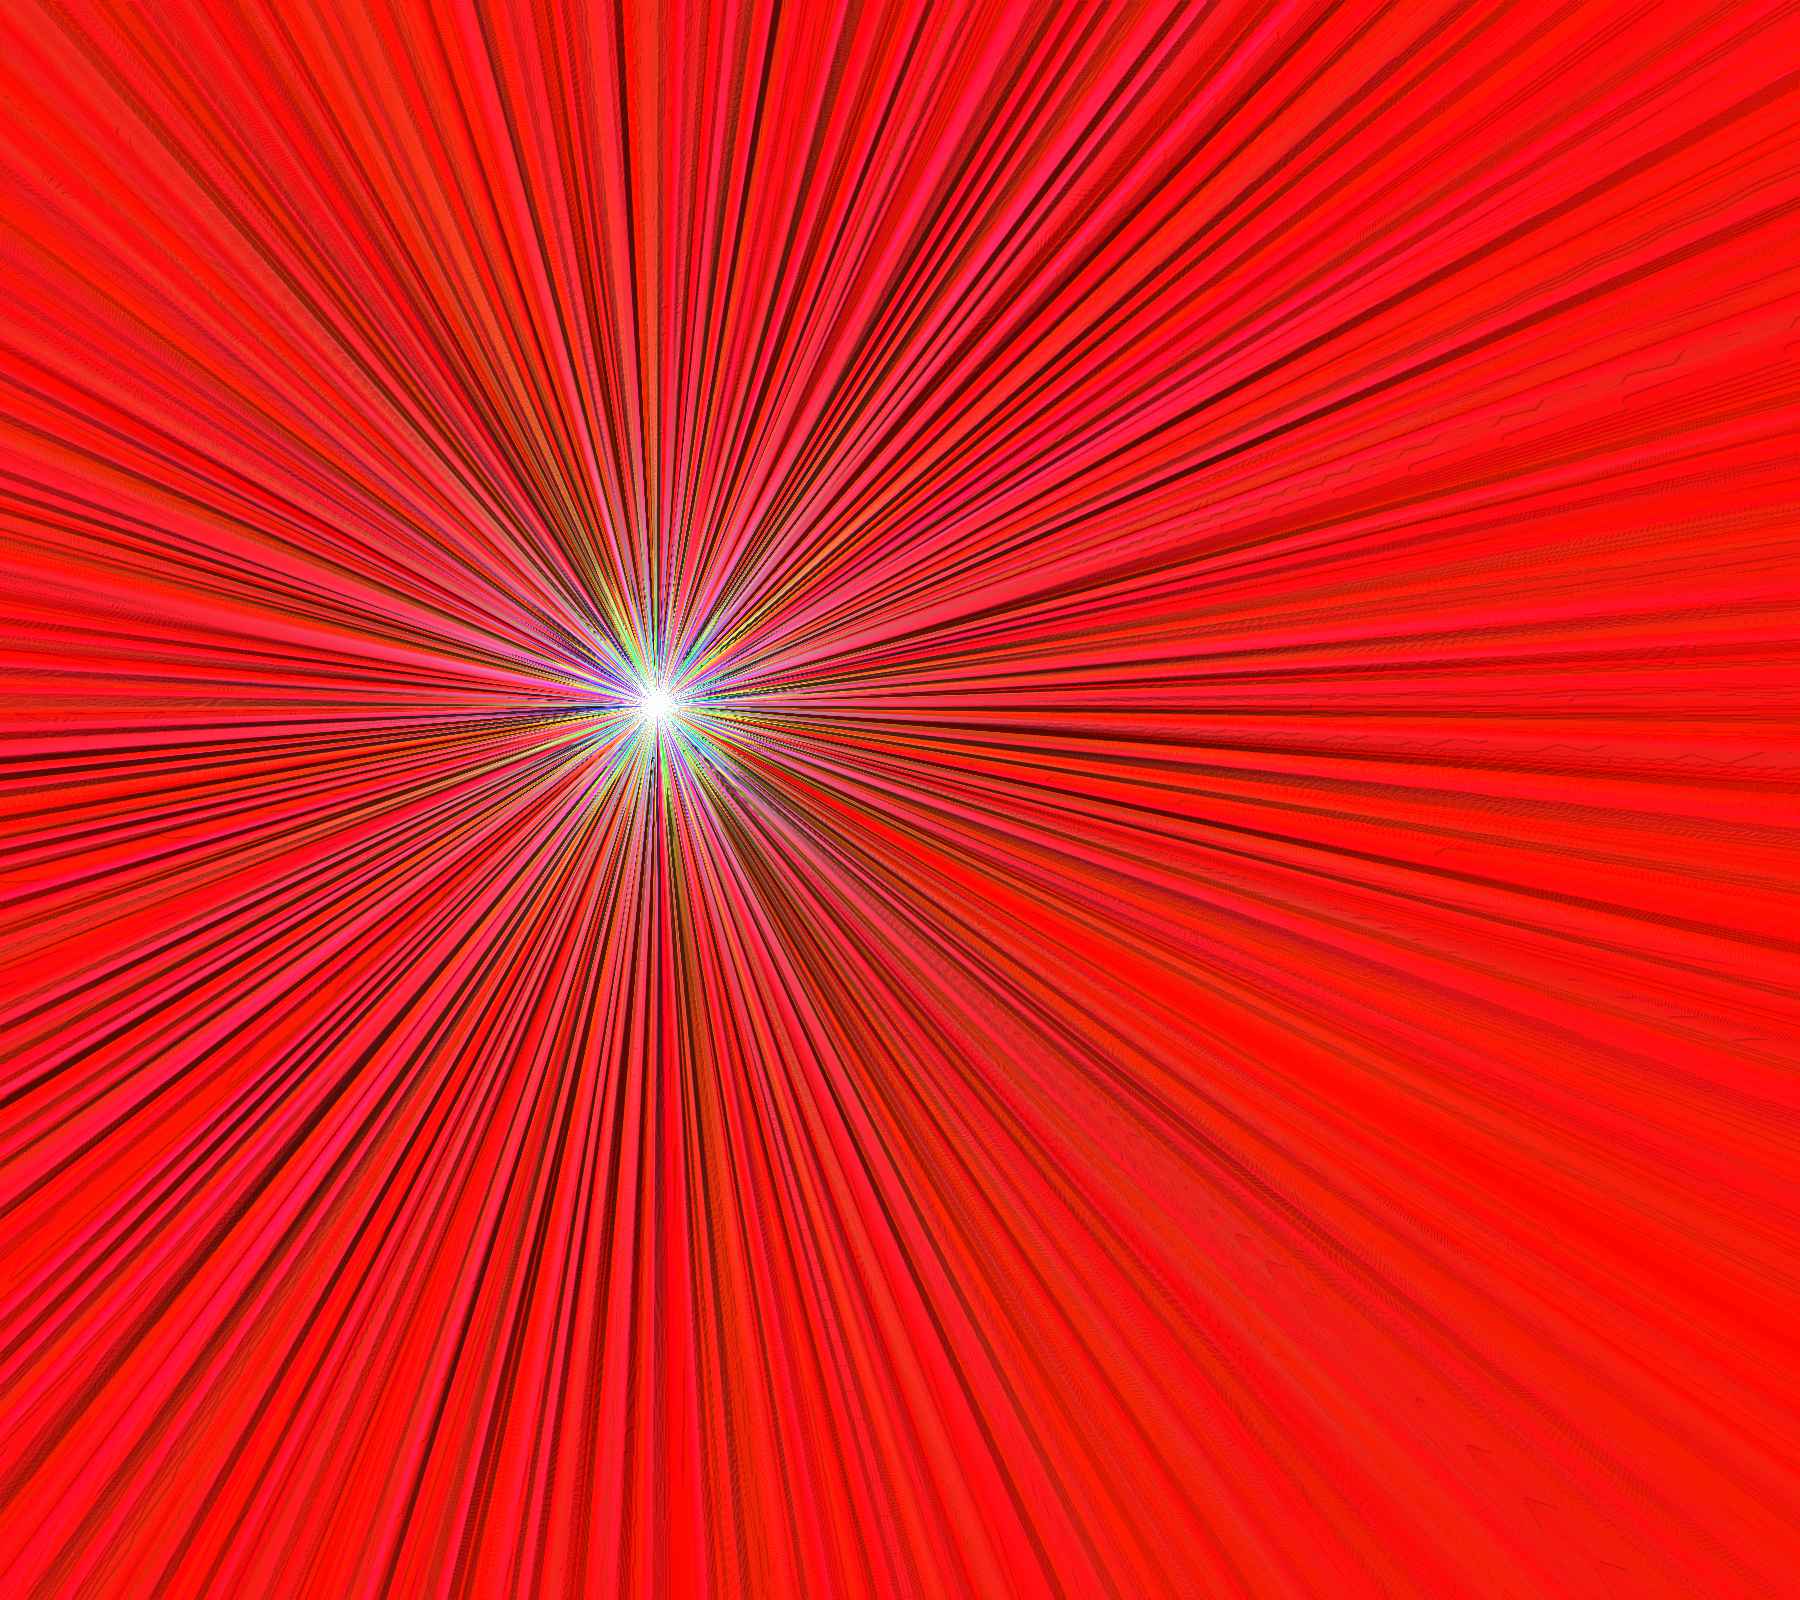 Red Starburst Radiating Lines Background 1800x1600 HD Wallpapers Download Free Images Wallpaper [wallpaper981.blogspot.com]